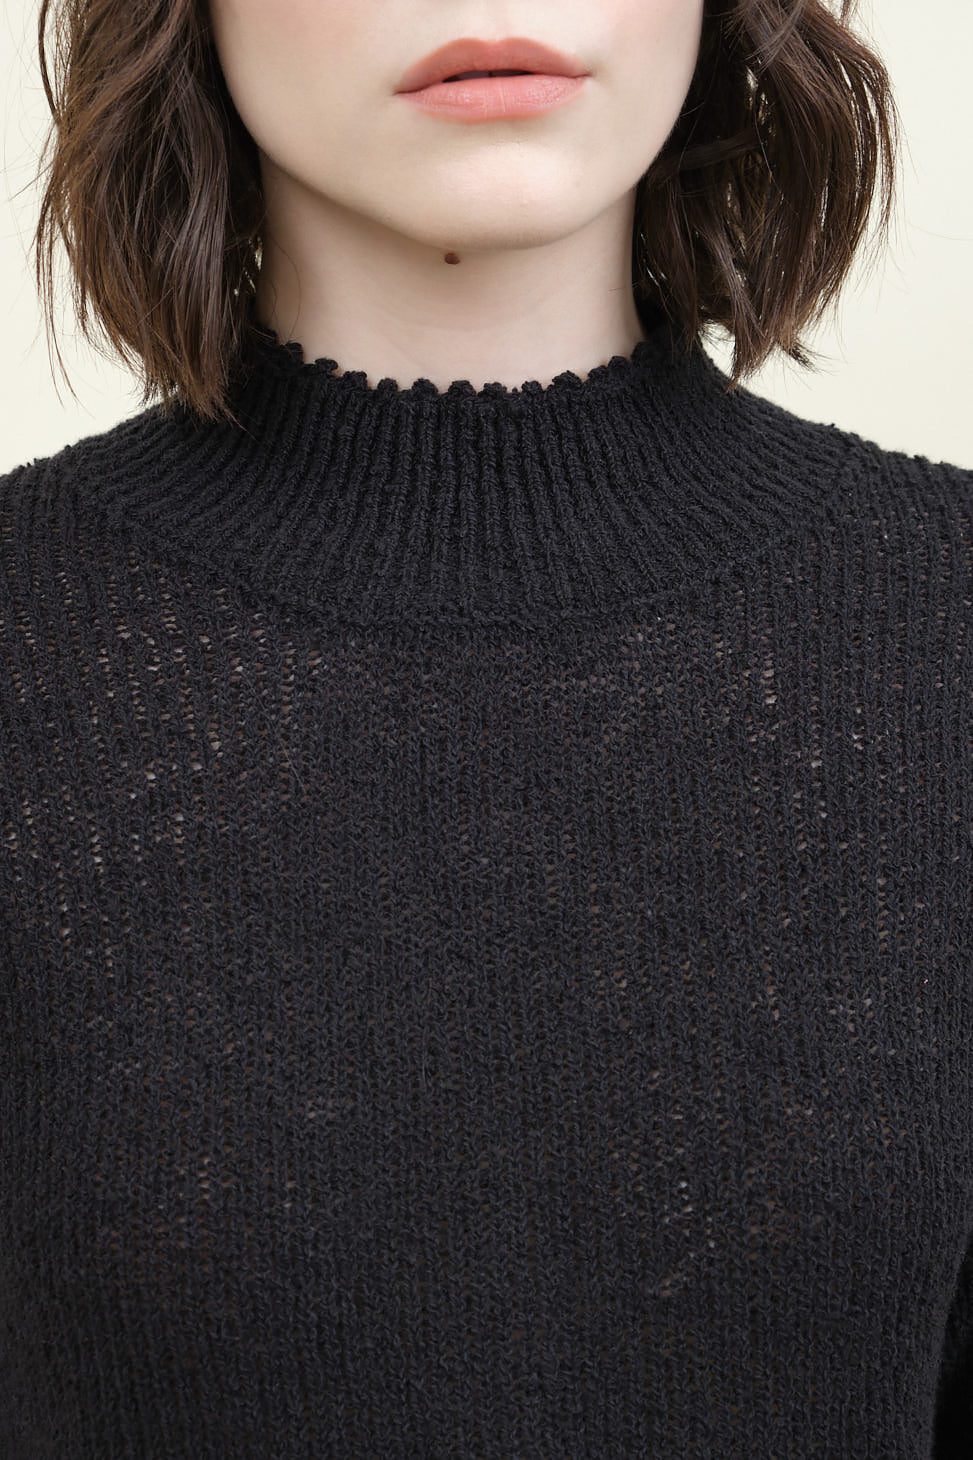 Neckline on Cropped Tee in Black